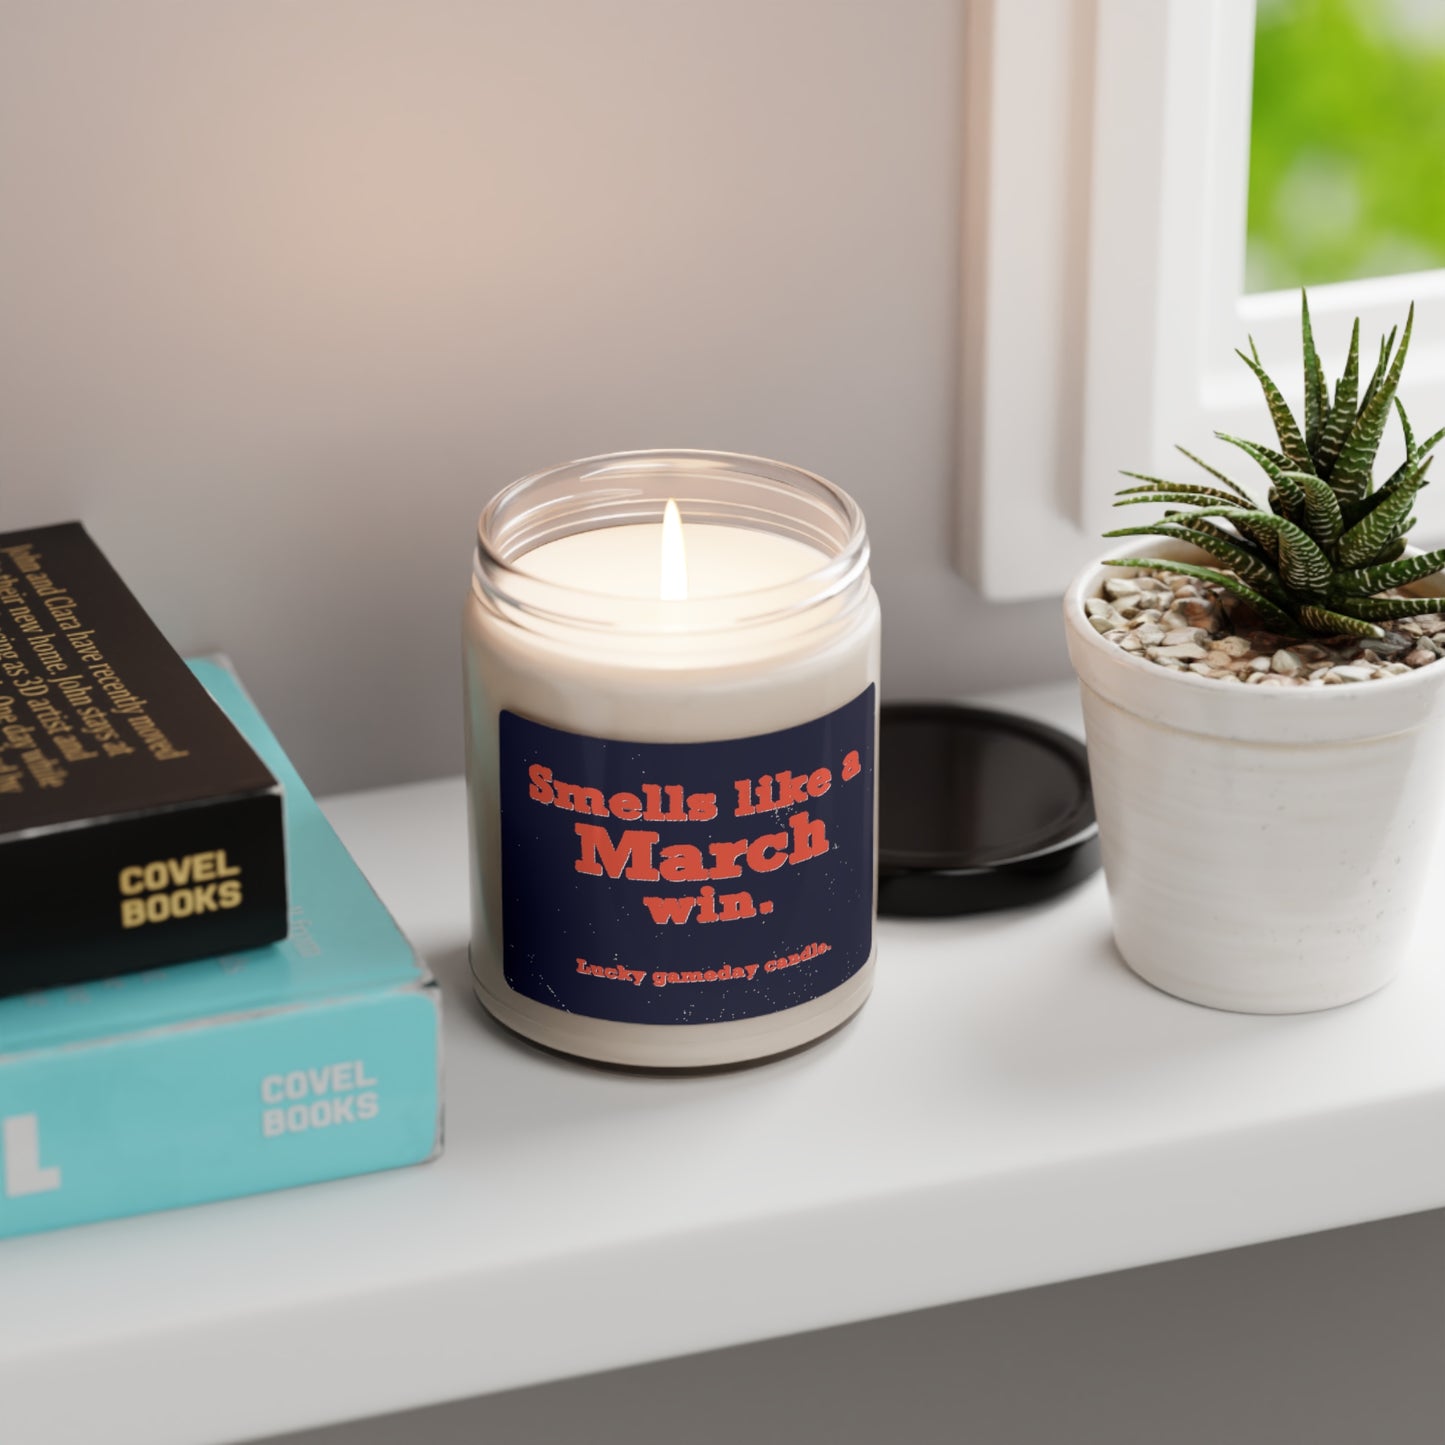 Illinois - "Smells Like a March Win" Scented Candle